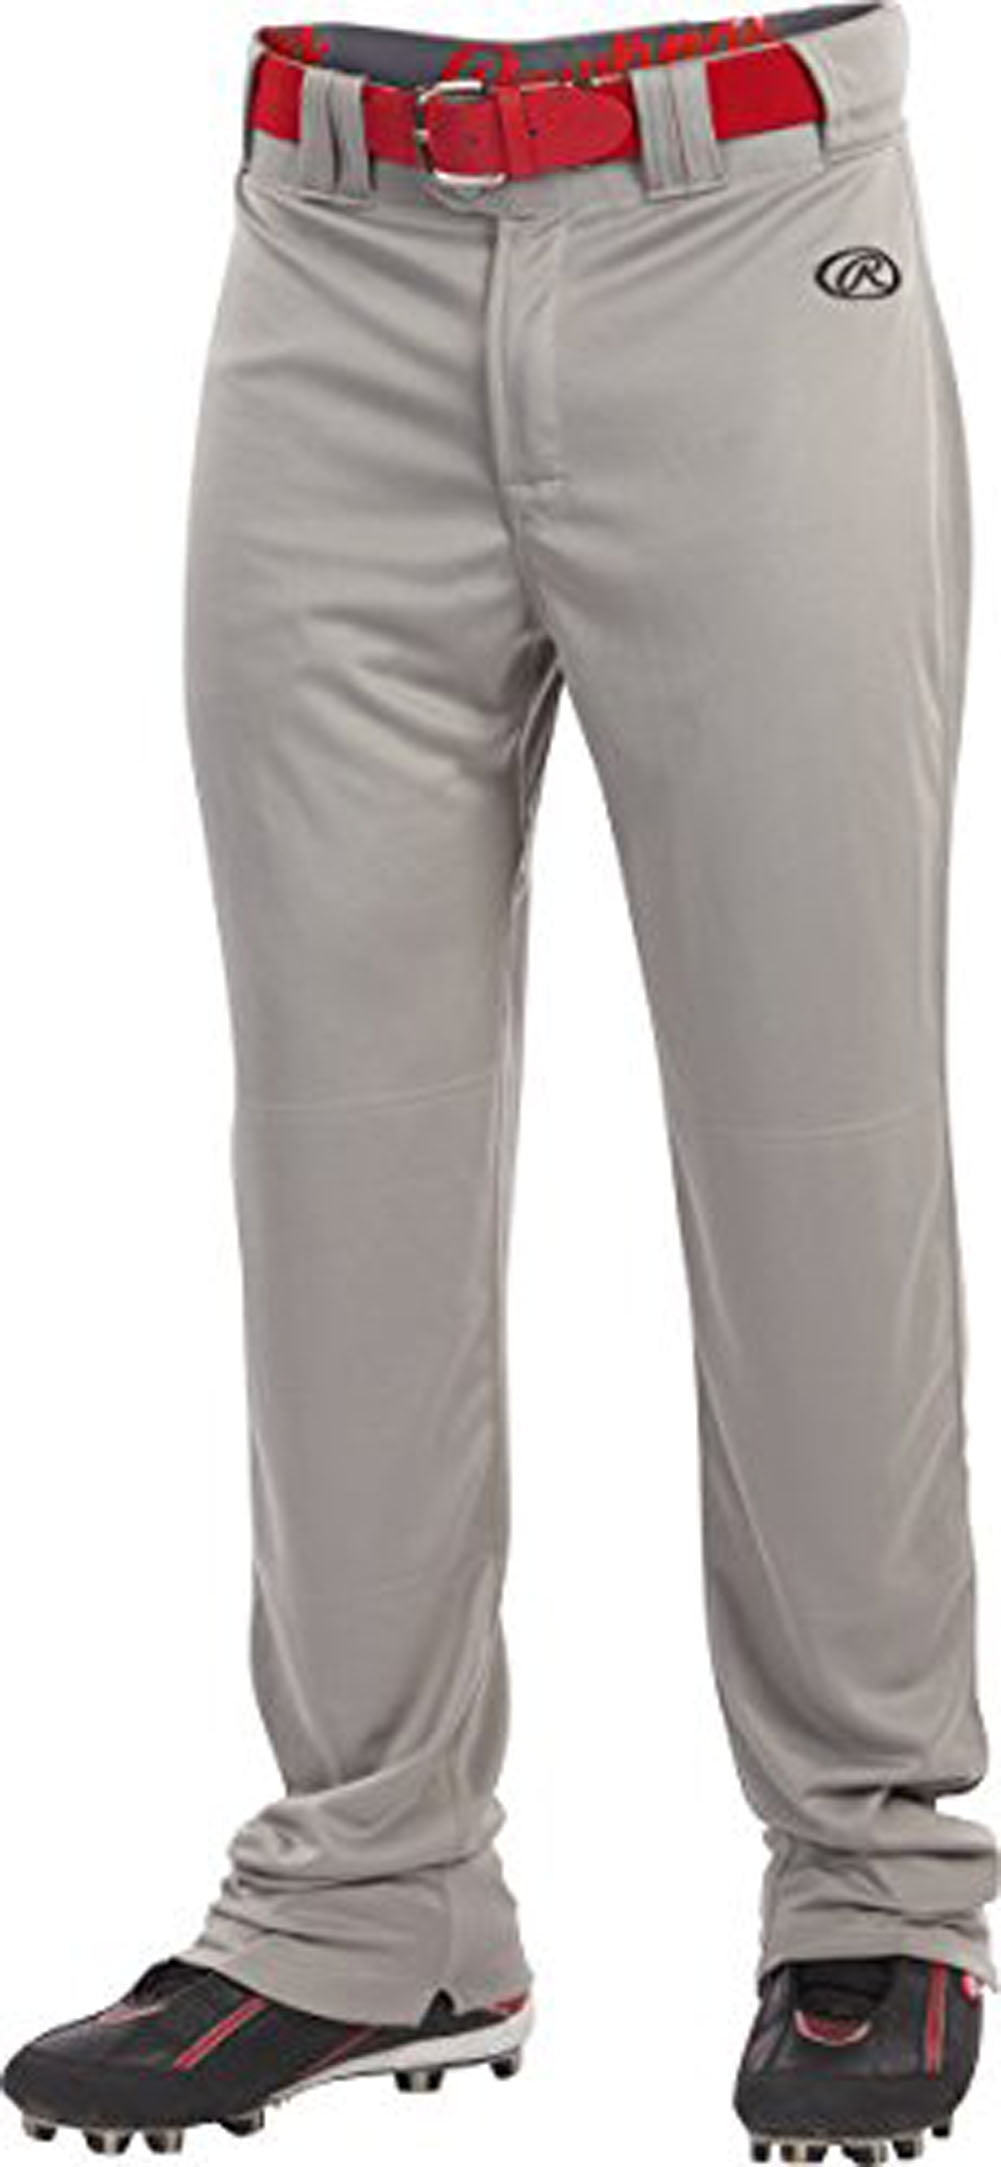 Rawlings Sporting Goods Boys Boys Youth Launch Pant x Large White 